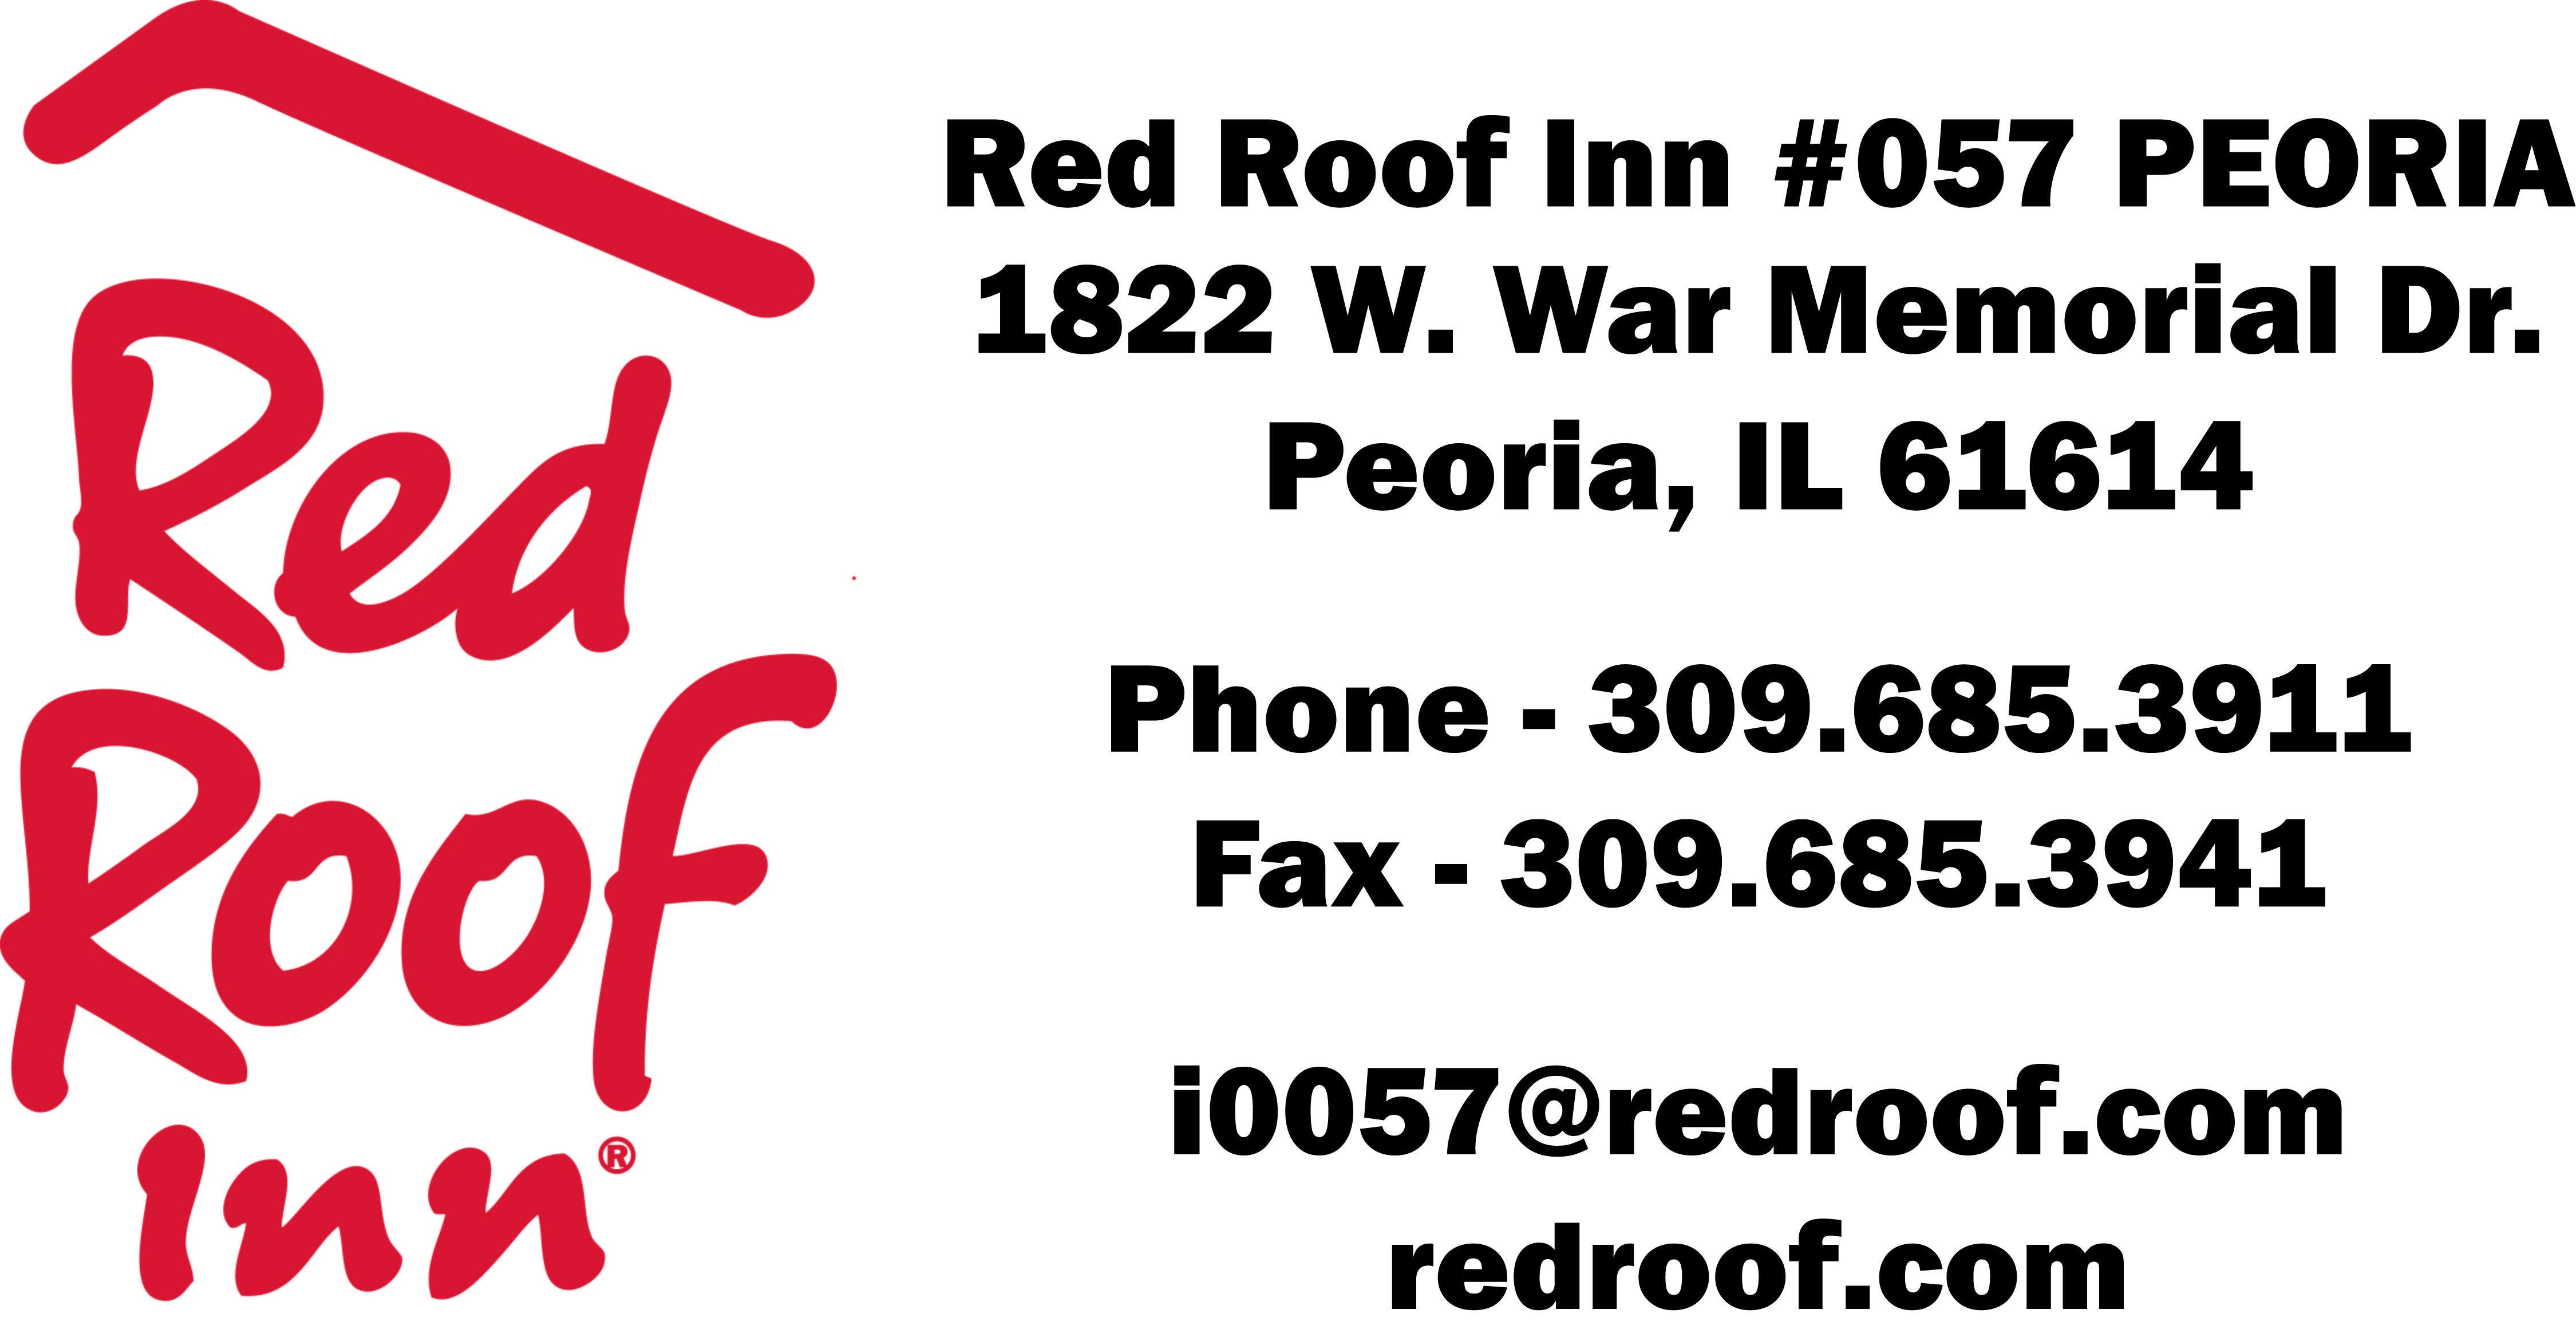 Red Roof Inn Logo - Current Partners